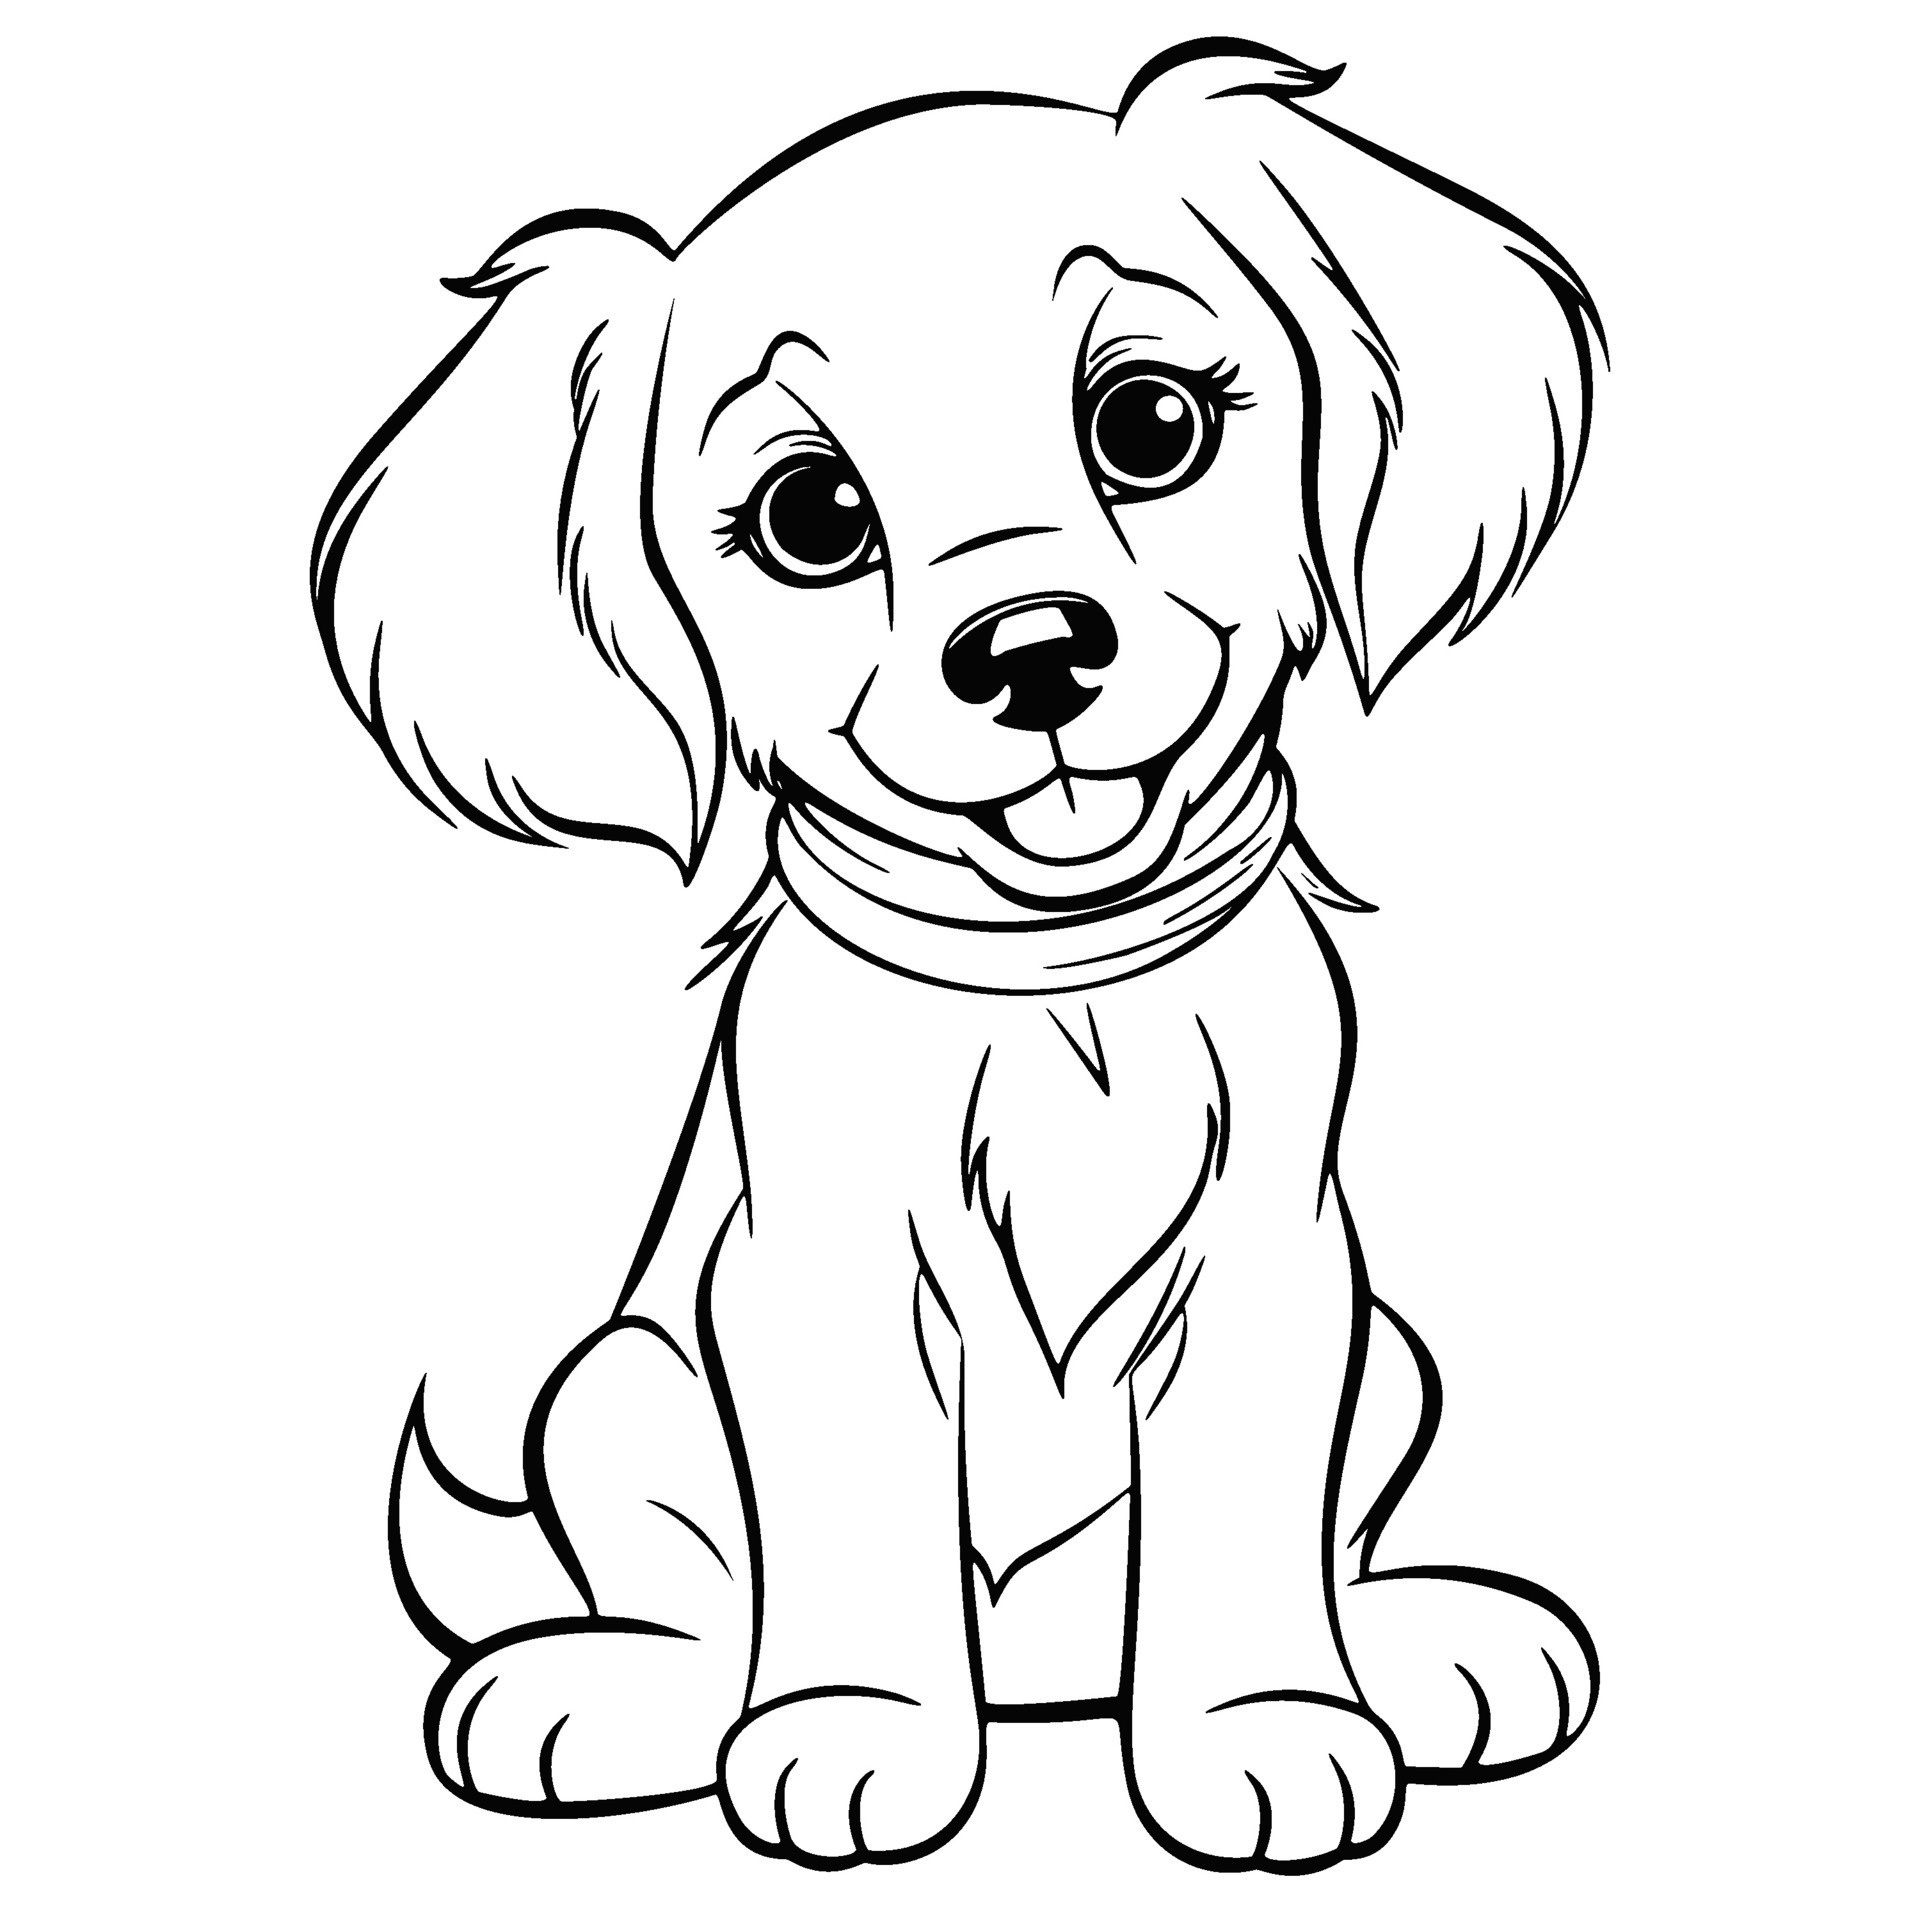 https://static.vecteezy.com/system/resources/previews/026/171/439/original/kawaii-puppy-coloring-page-for-kids-vector.jpg